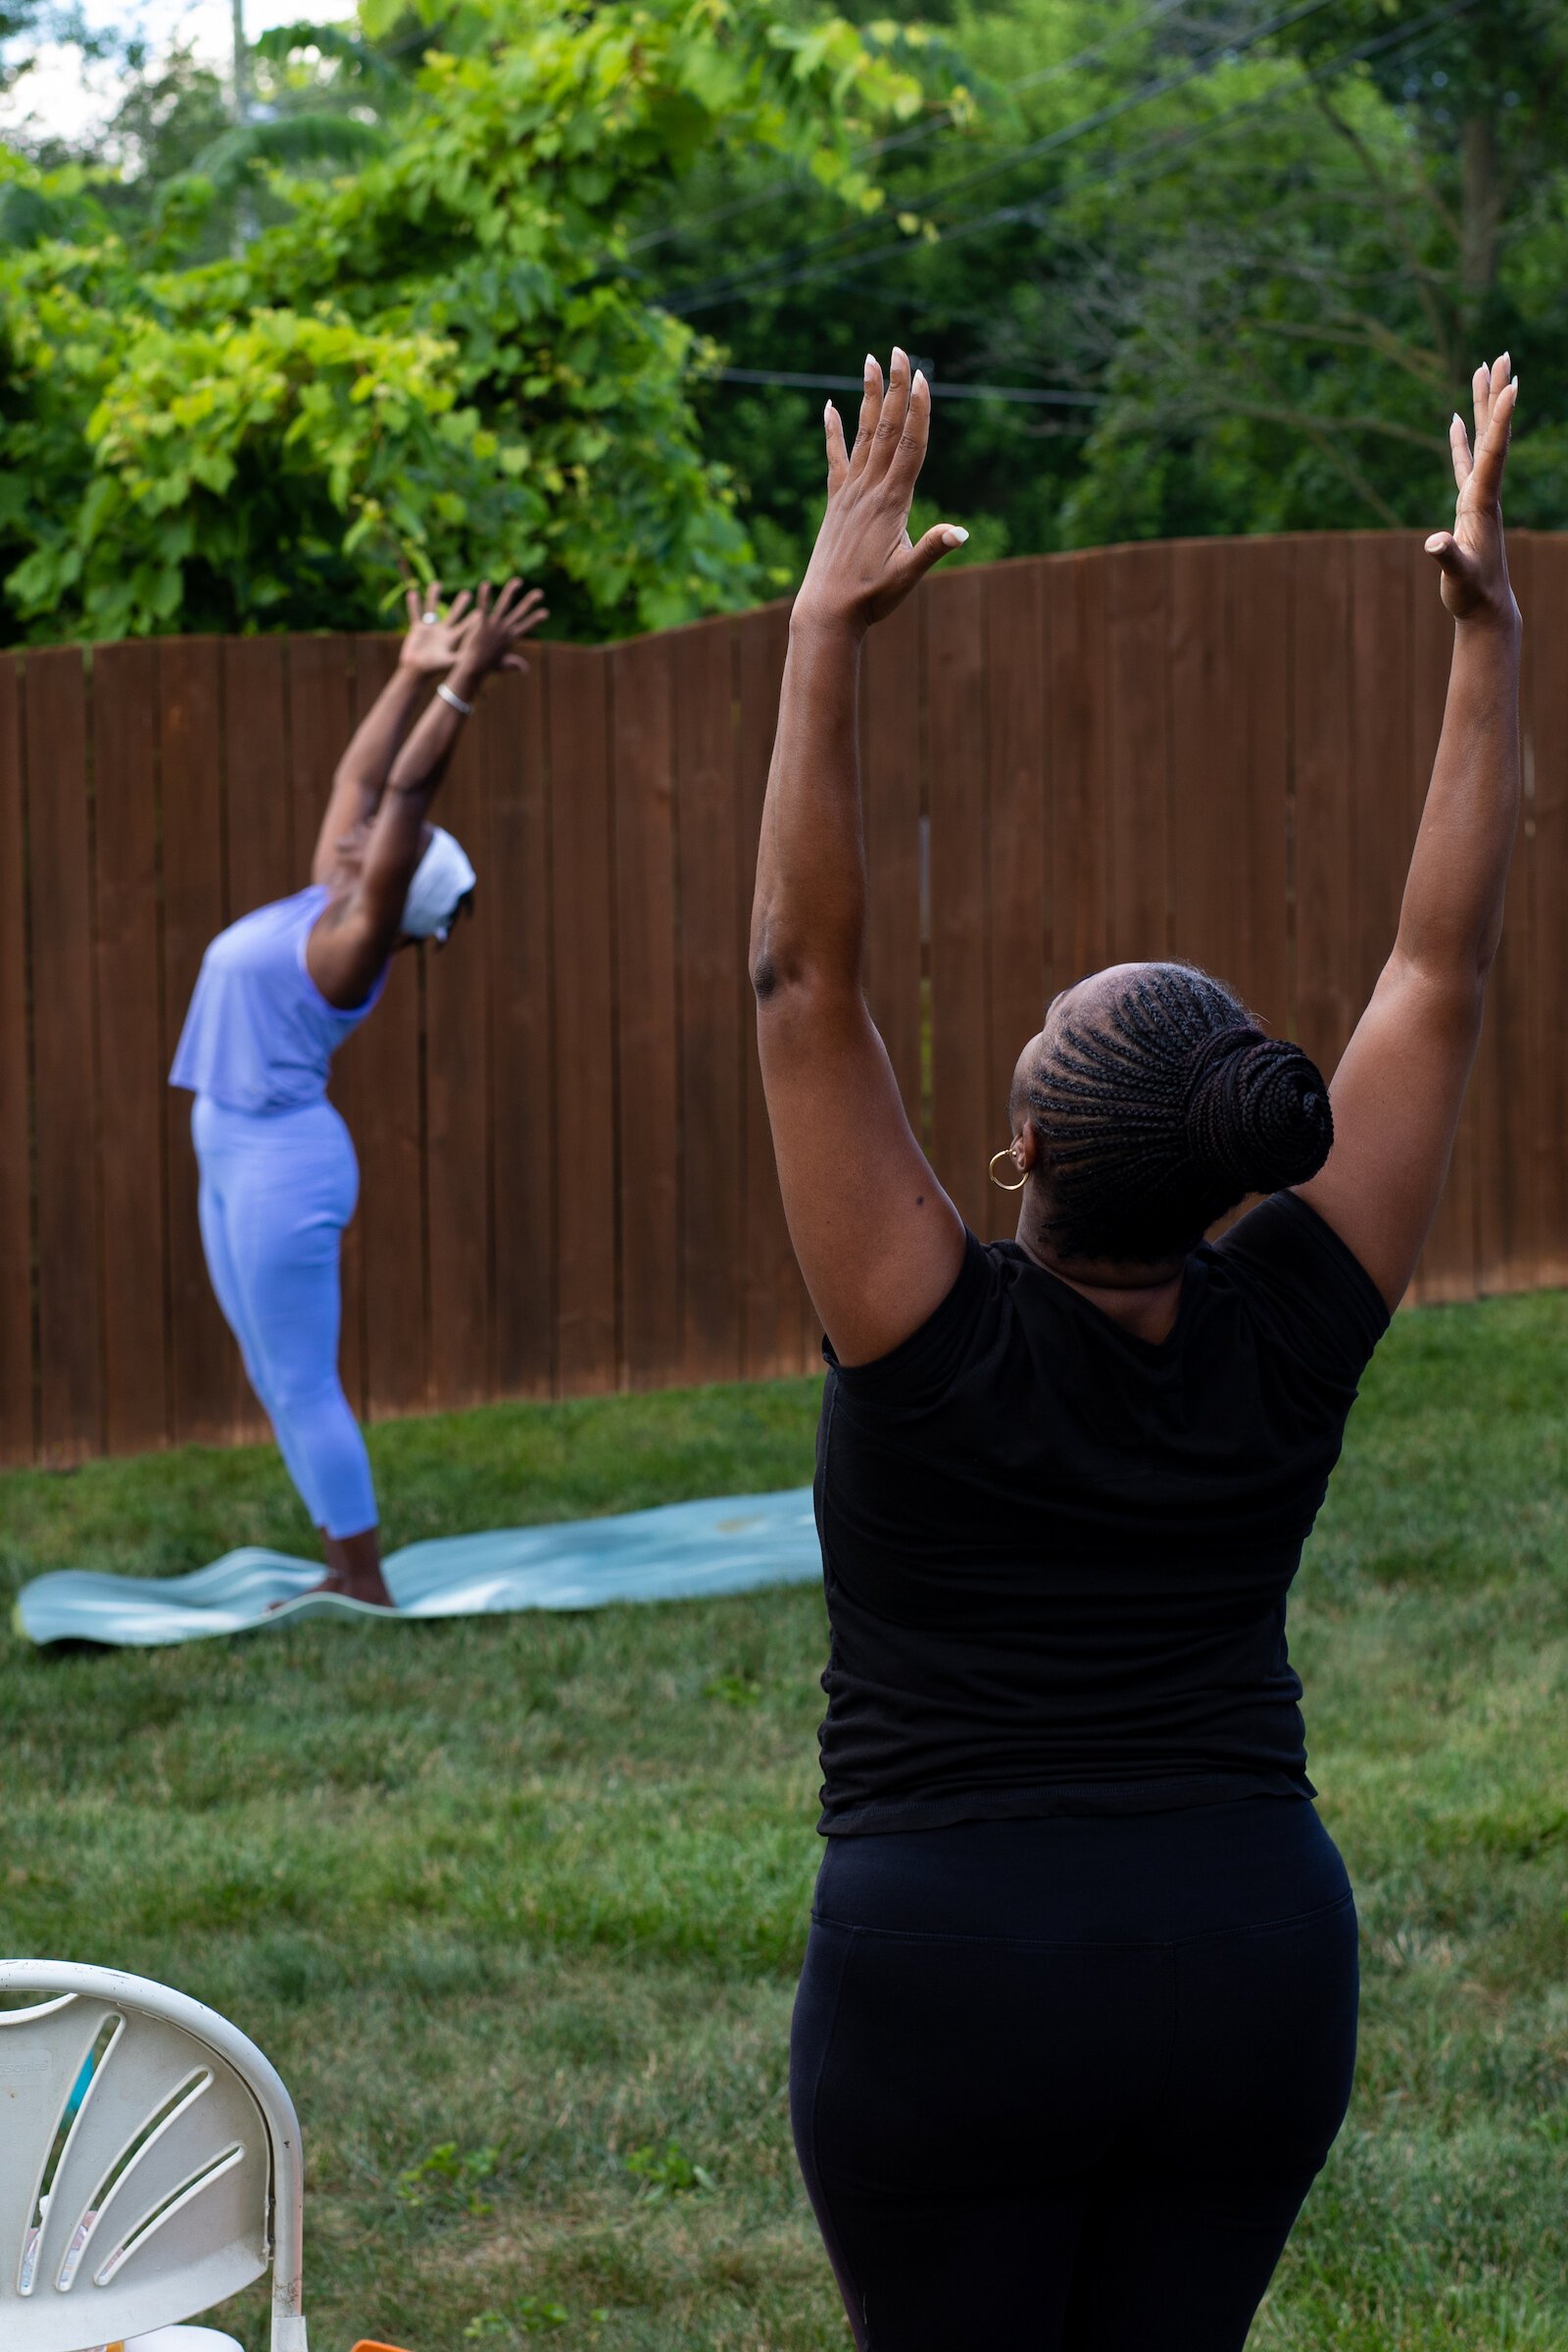 Diane Rogers, left, a longtime resident and current President of the Oxford Community Association, leads a yoga class in her backyard for her neighborhood and community drop-ins.